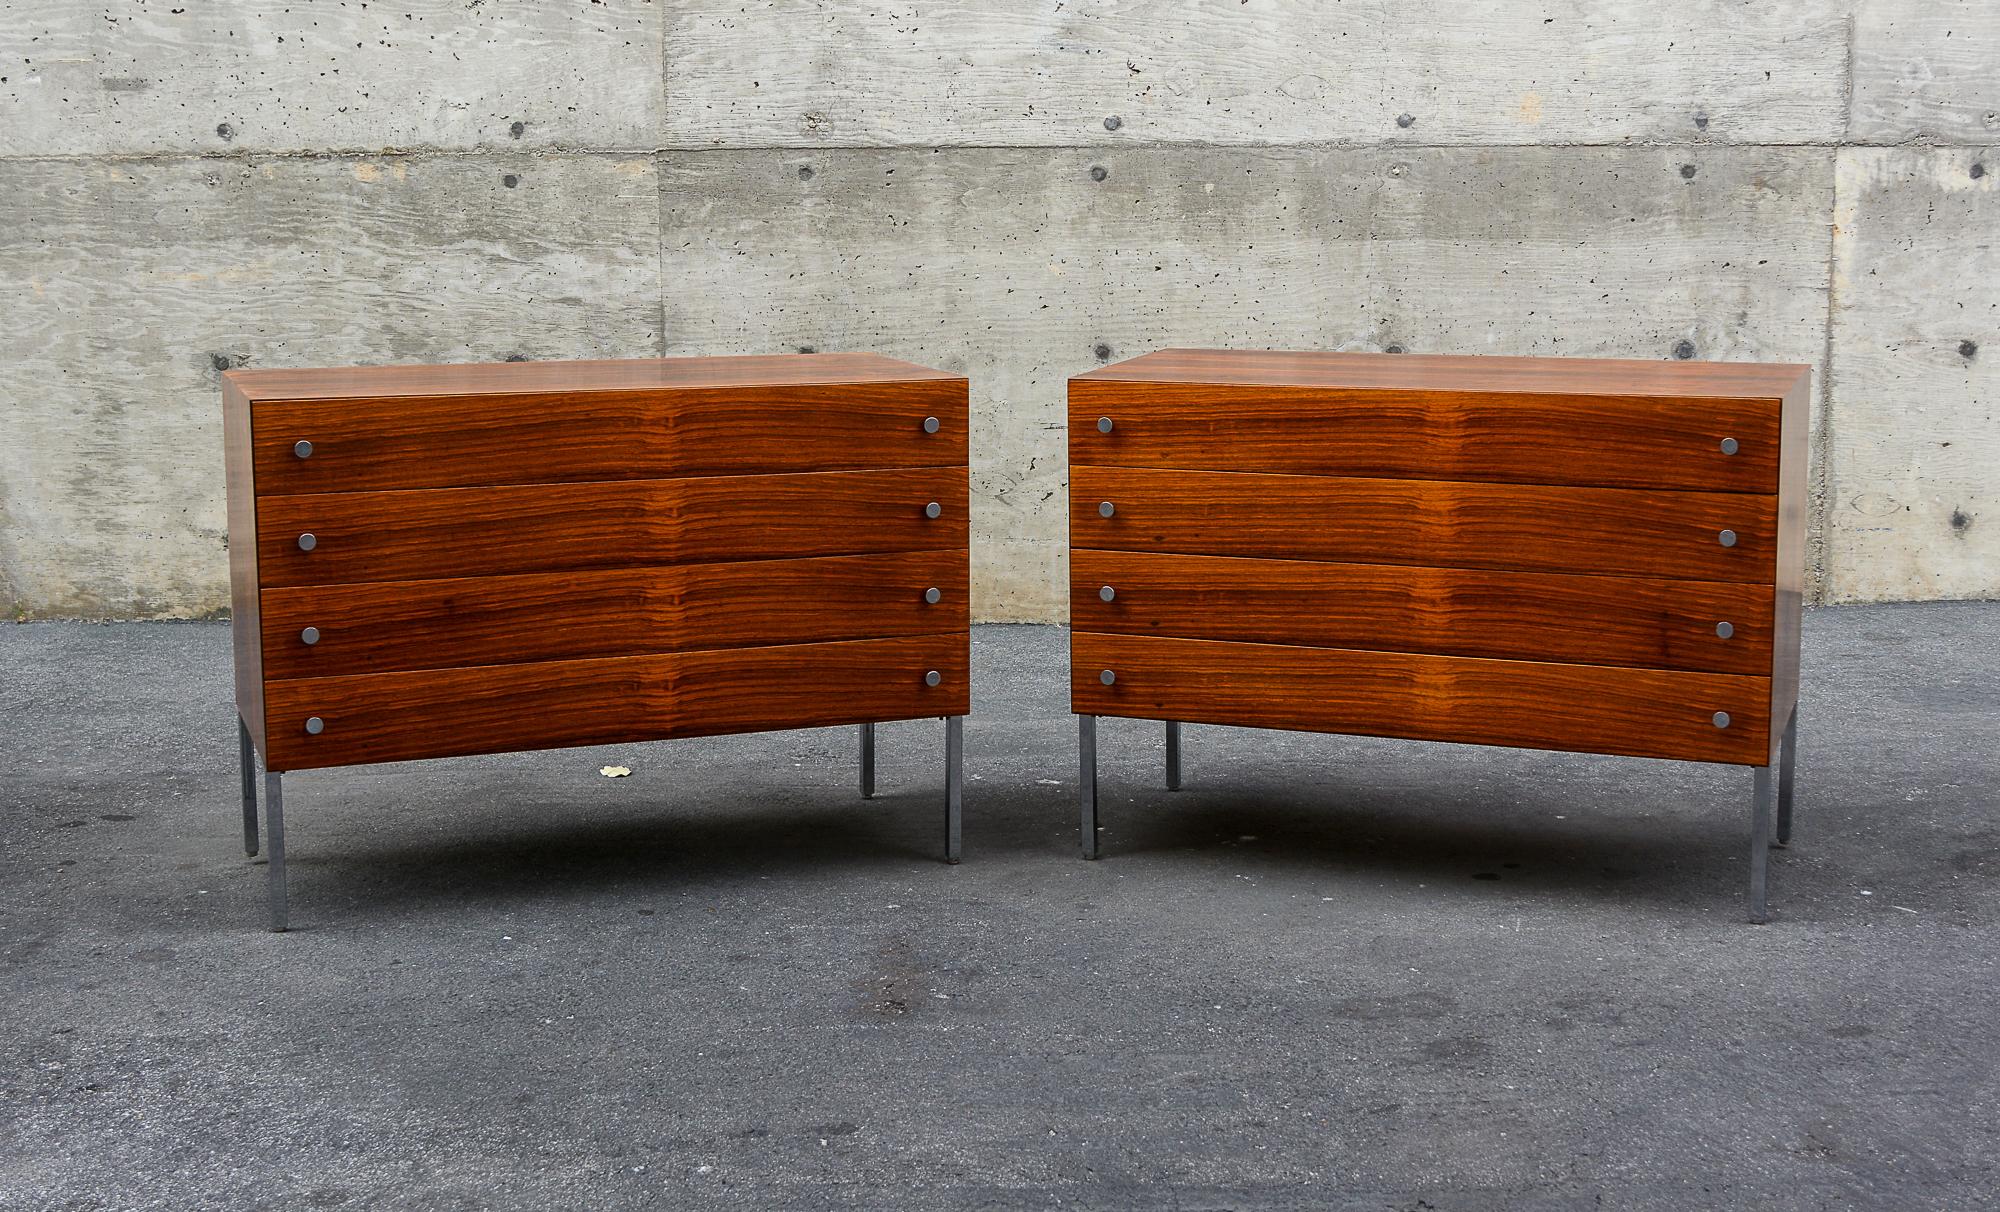 Pair of rosewood dressers designed by Poul Norreklit. These were made by Sigurd Hansen Mobelfabrik of Denmark. The legs and handles are chrome plated. The grain on the rosewood is outstanding. These have been refinished. Contact us for better